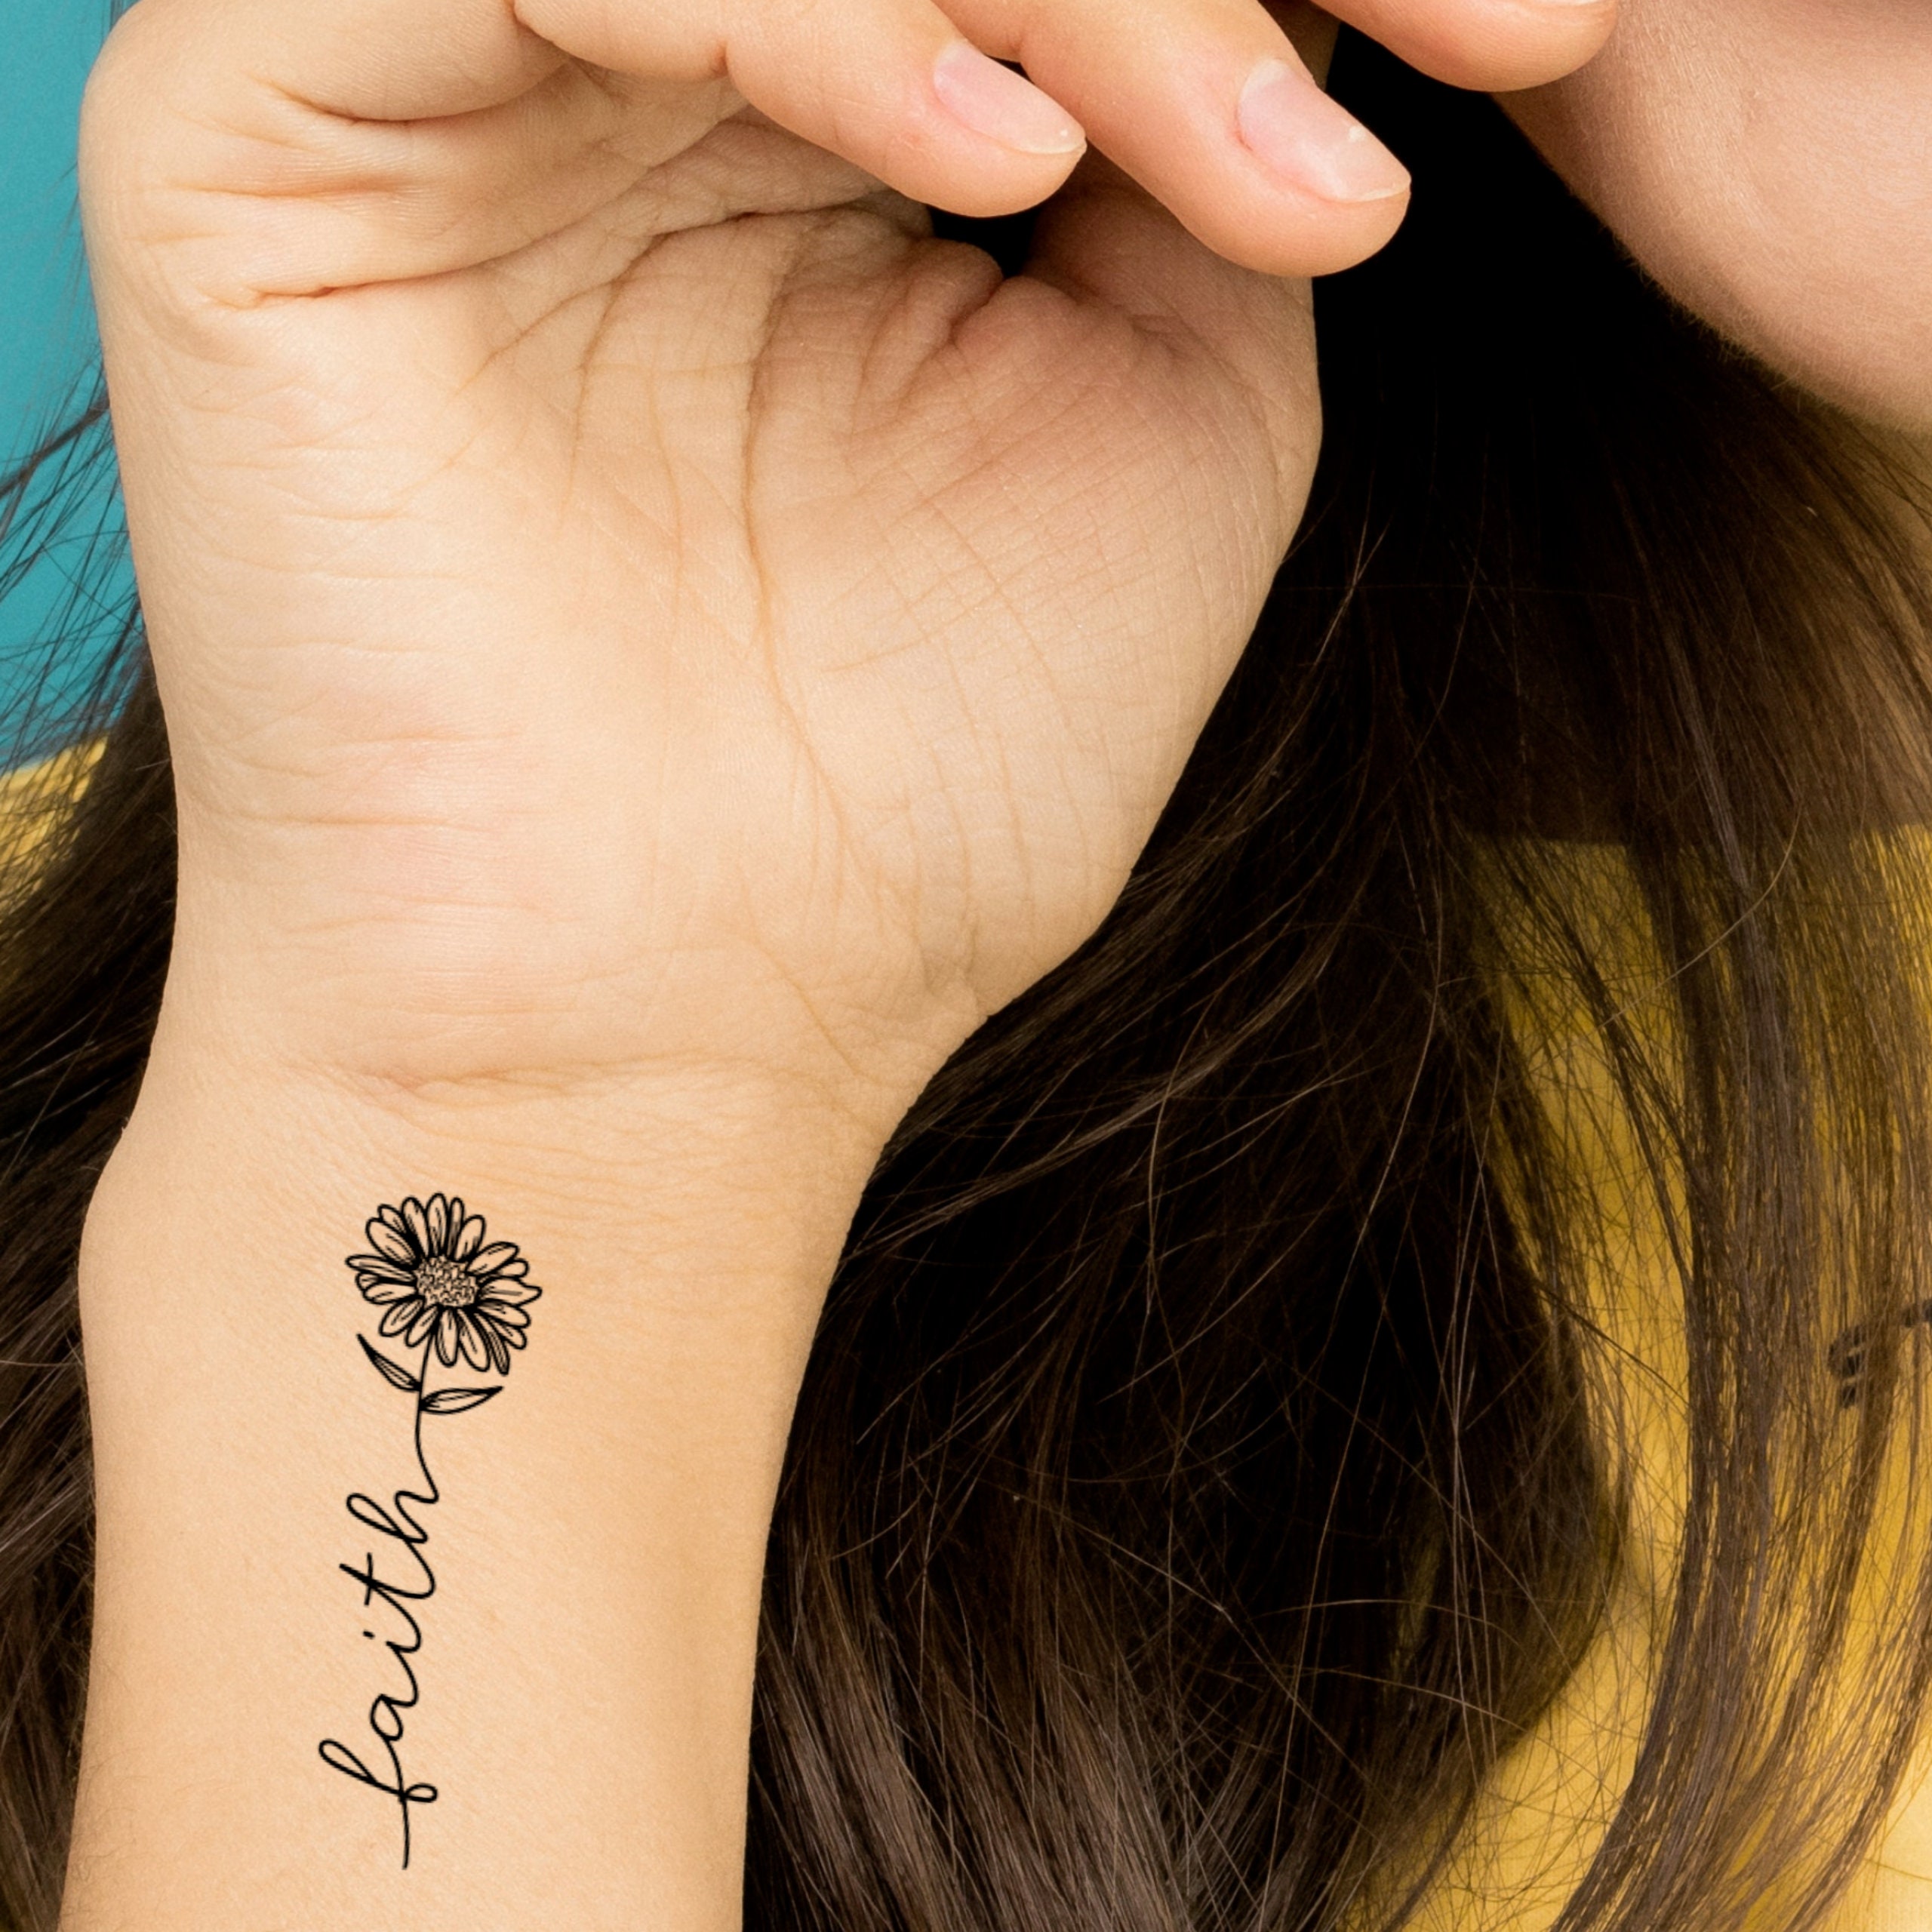 These motivational temporary tattoos will help you get through a tough day  | Metro News